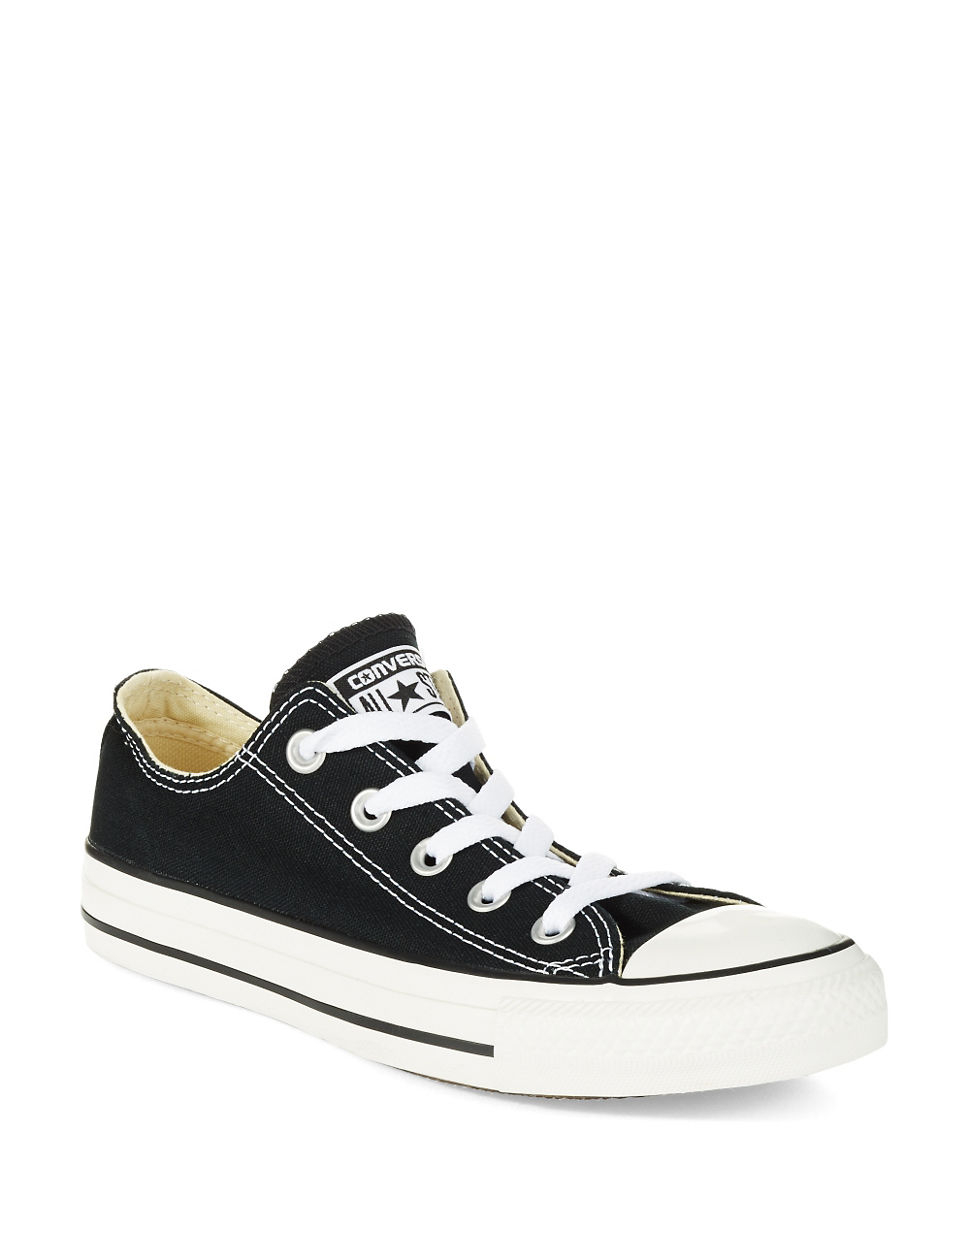 Converse All Star Sneakers in Black | Lyst